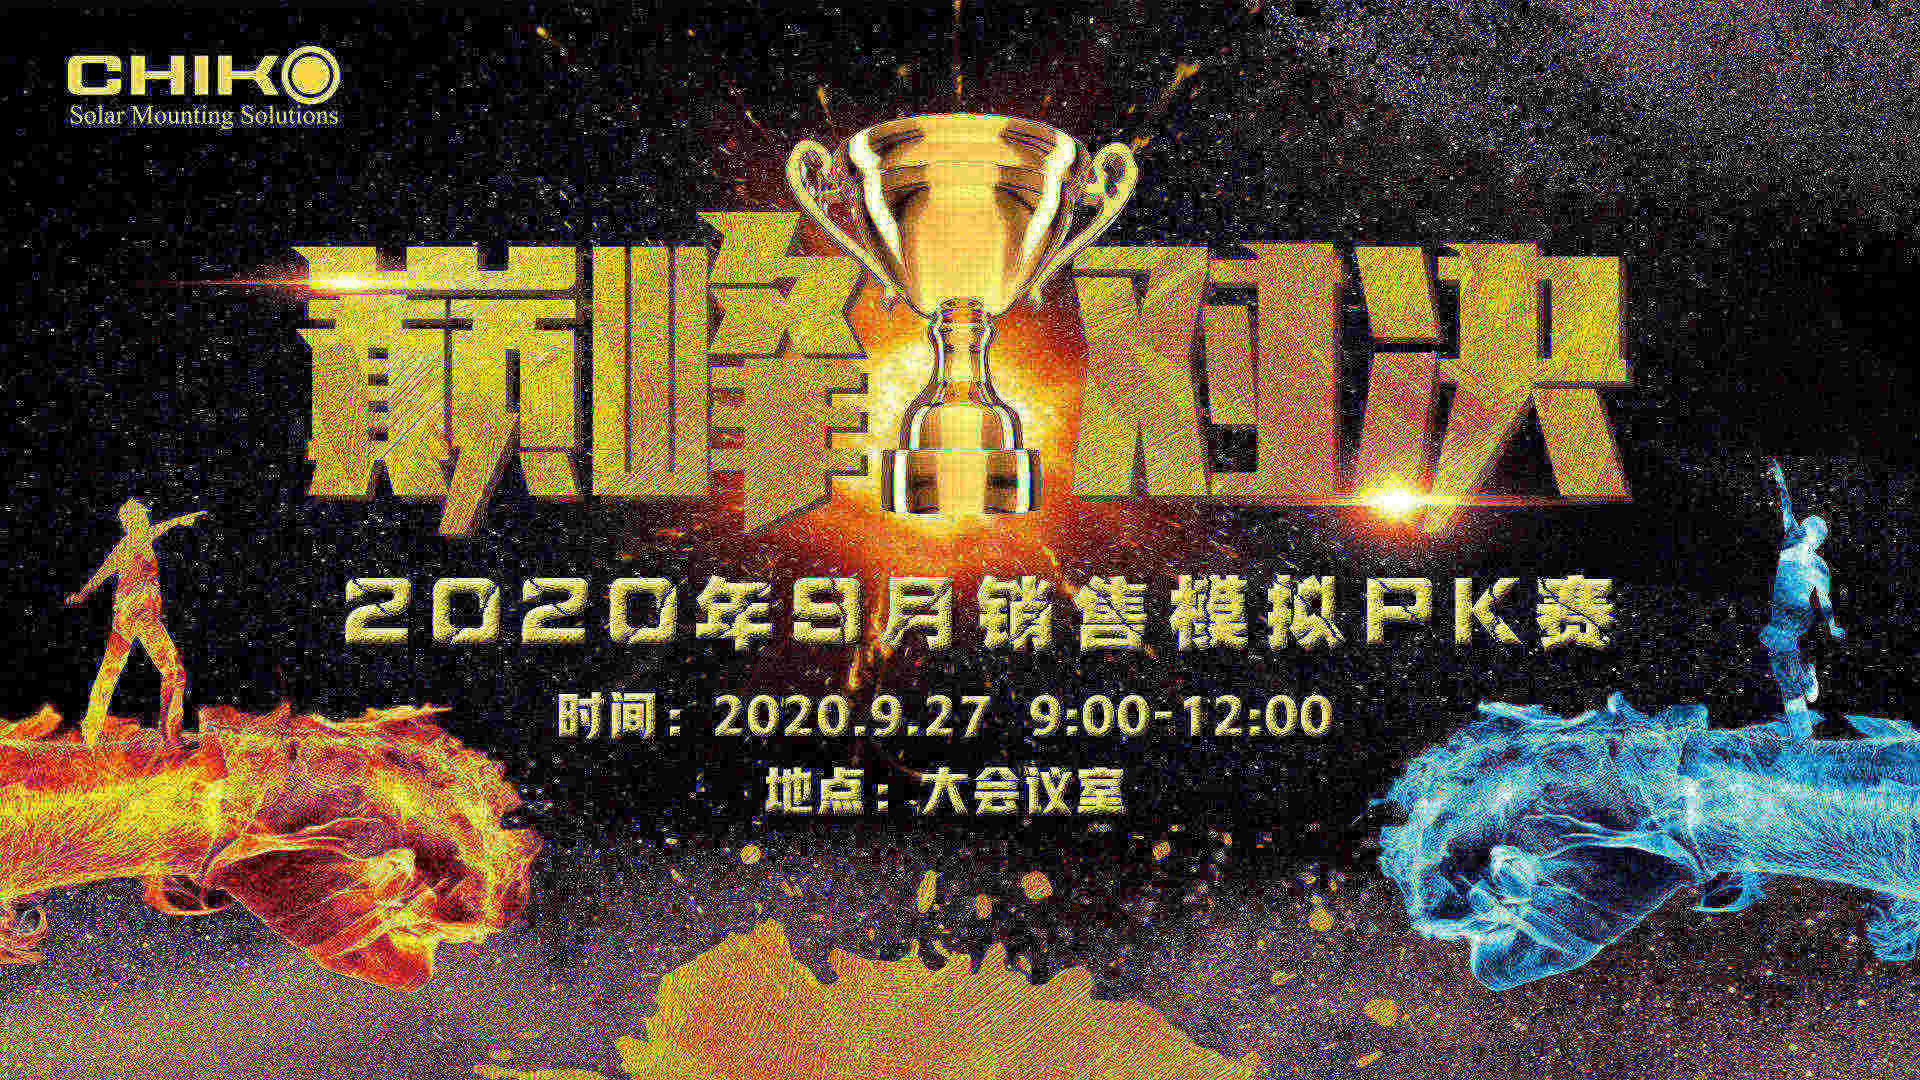 Who is the winner ? CHIKO Solar Sales Simulation PK Competition In September, 2020